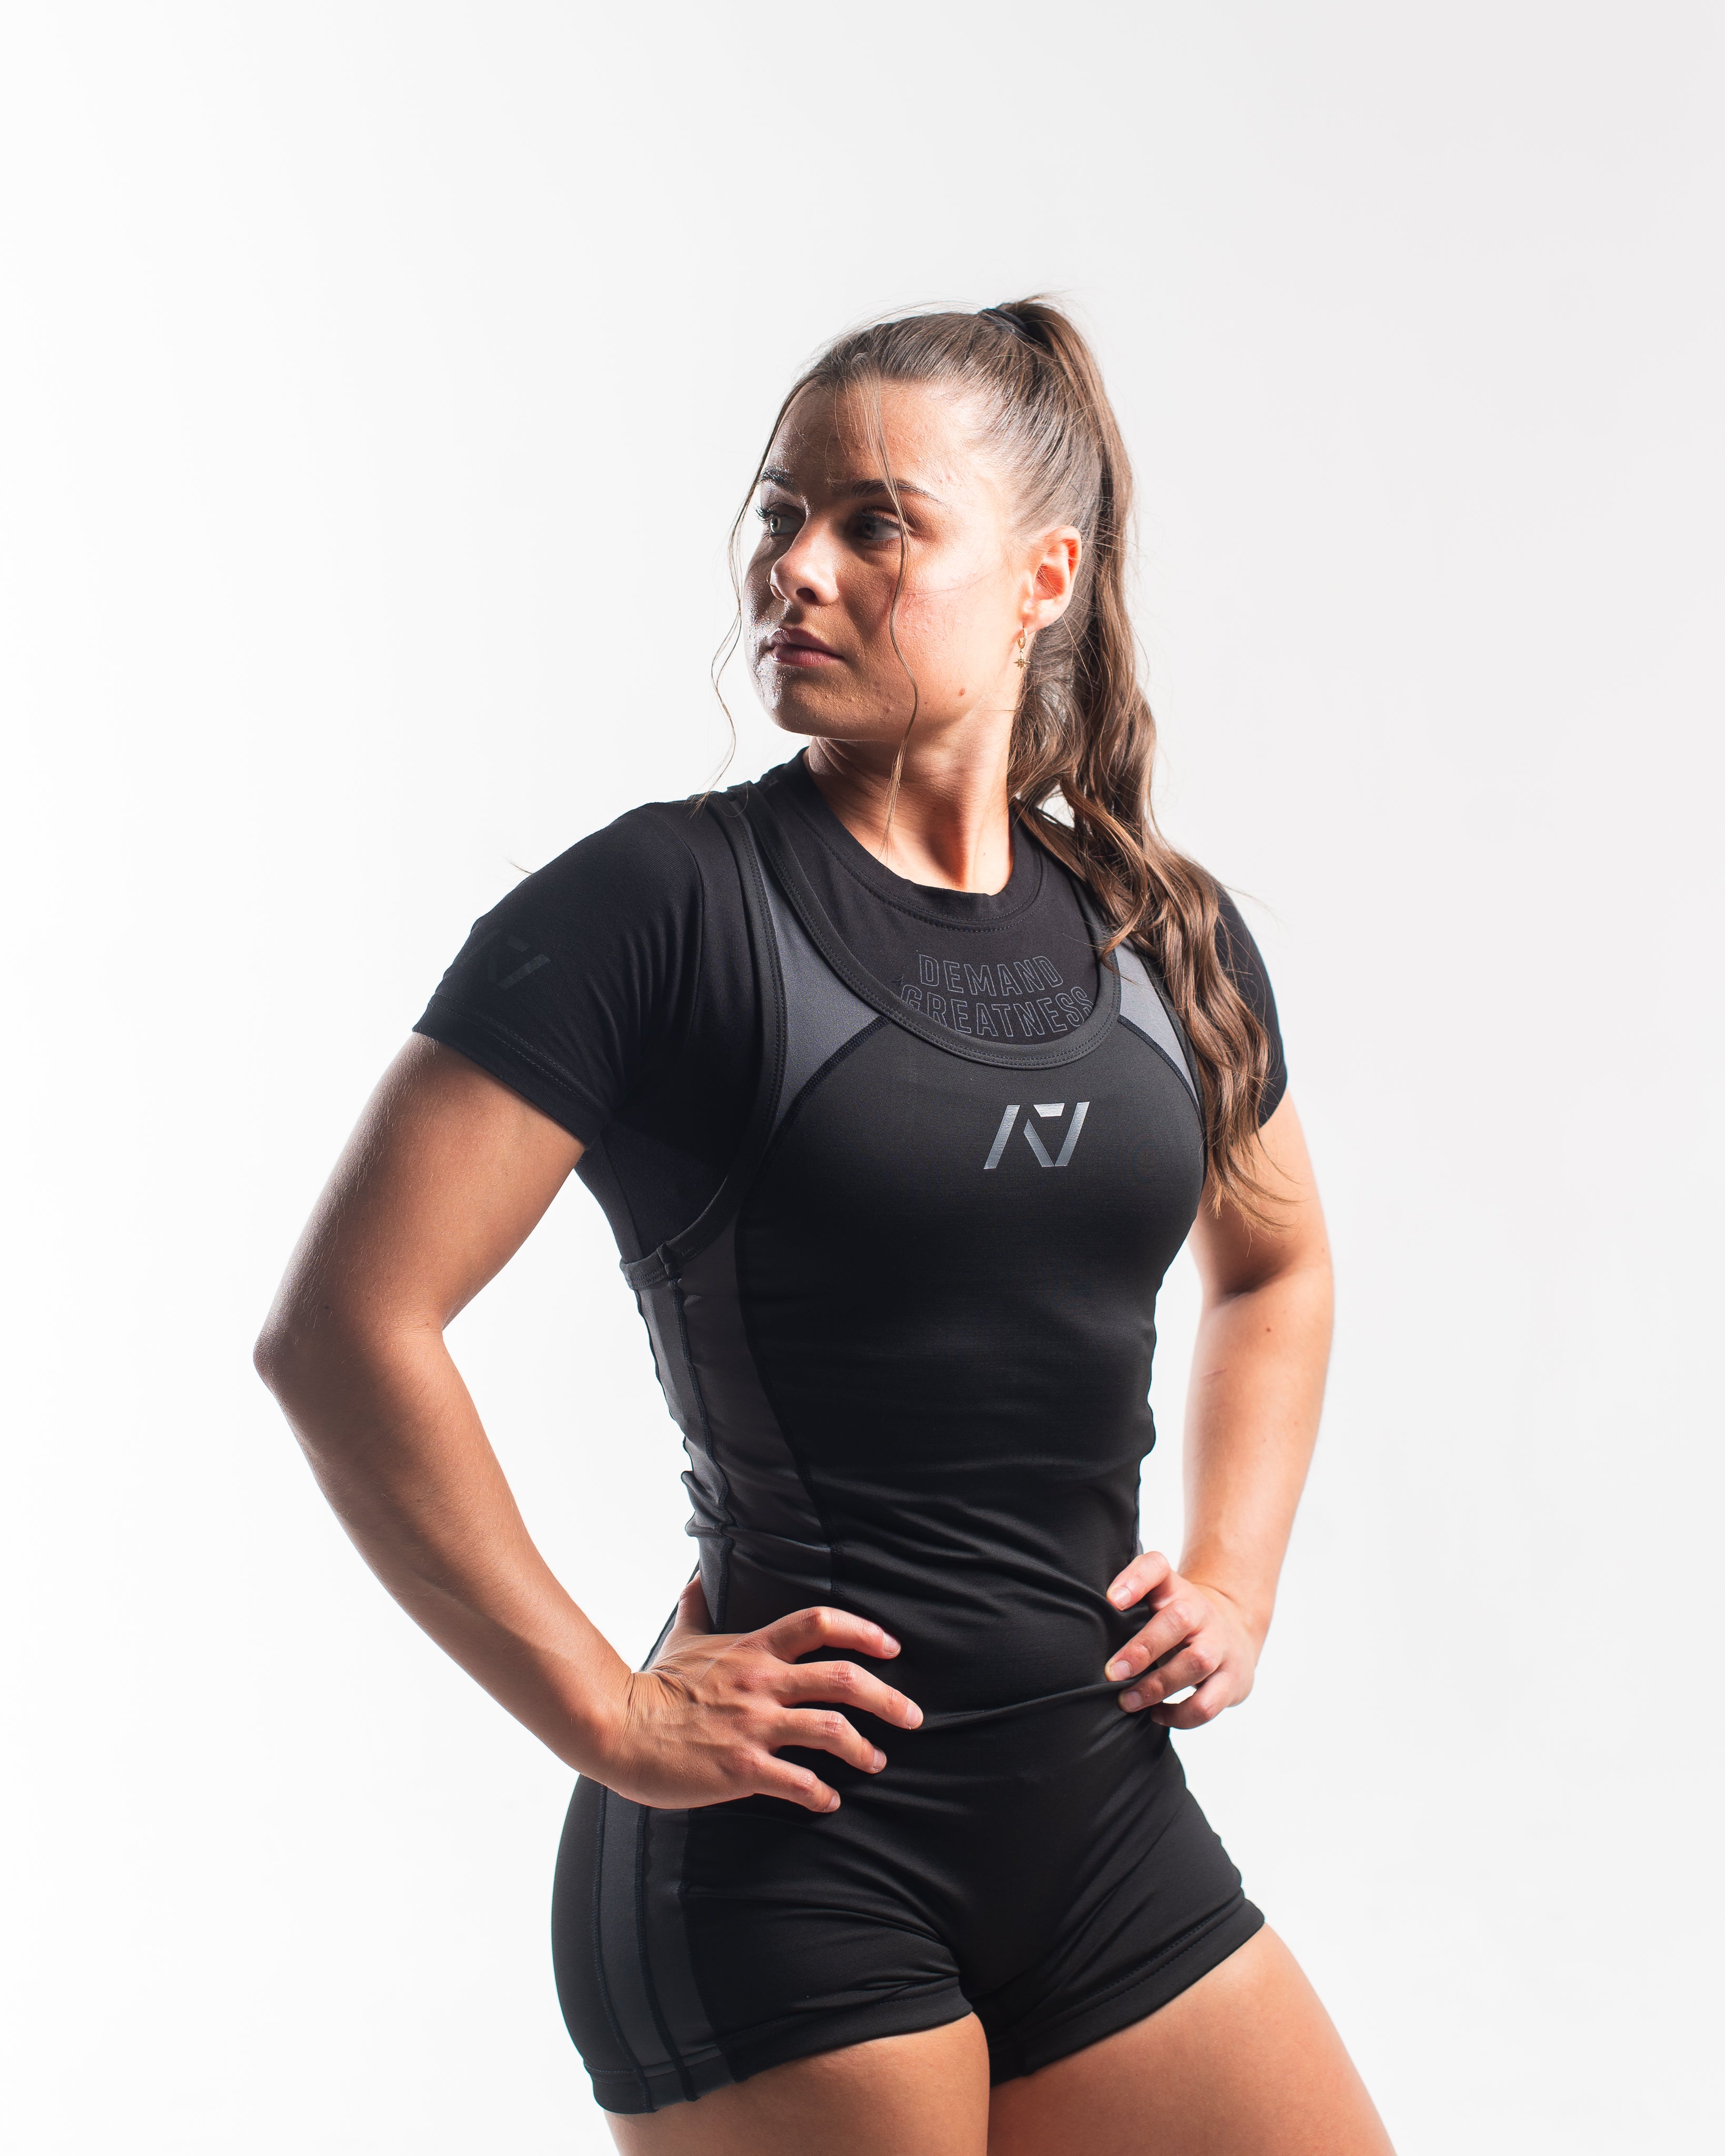 A7 IPF Approved Shadow Stone Luno singlet with extra lat mobility, side panel stitching to guide the squat depth level and curved panel design for a slimming look. The Women's singlet features a tapered waist and additional quad room. The IPF Approved Kit includes Powerlifting Singlet, A7 Meet Shirt, A7 Zebra Wrist Wraps, A7 Deadlift Socks, Hourglass Knee Sleeves (Stiff Knee Sleeves and Rigor Mortis Knee Sleeves). Genouillères powerlifting shipping to France, Spain, Ireland, Germany, Italy, Sweden and EU.